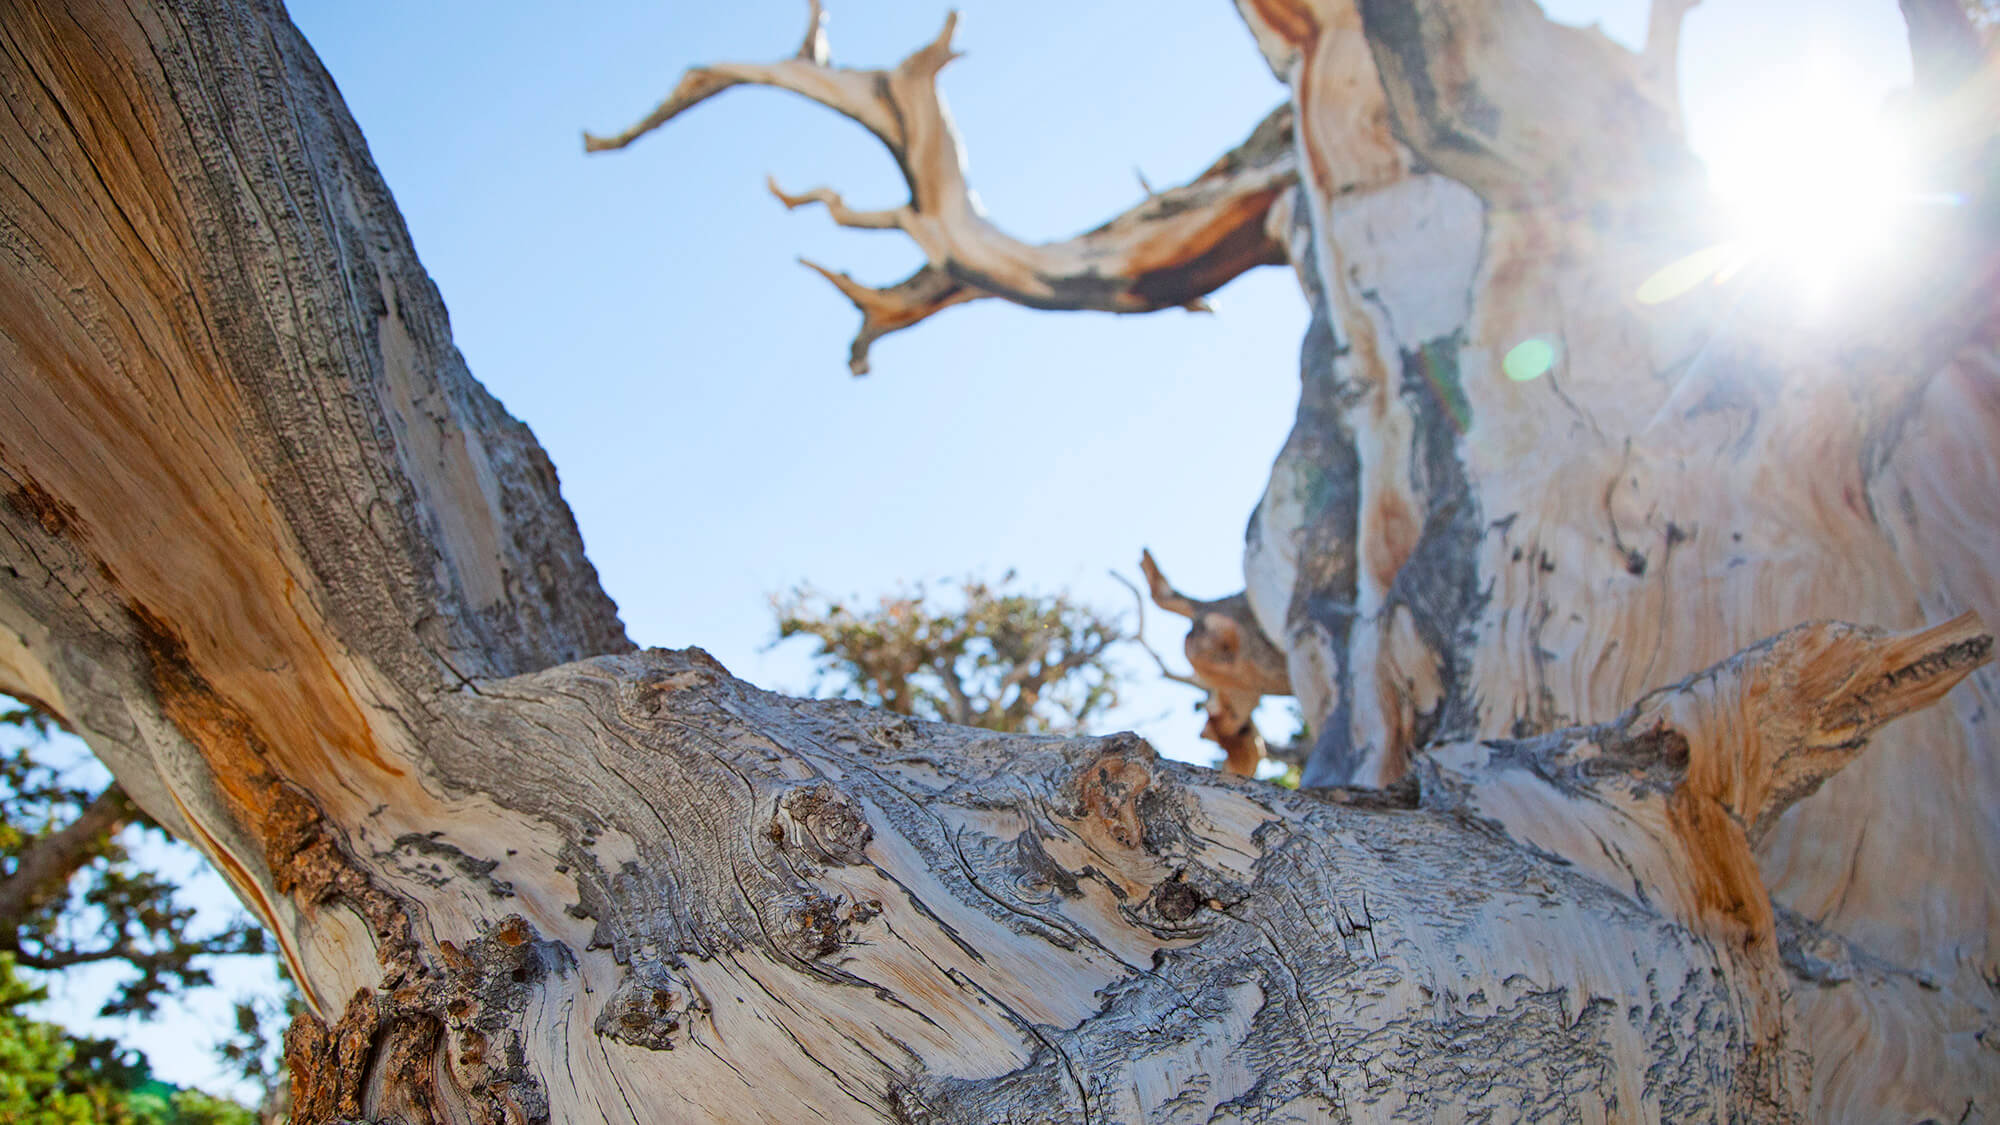 DON'T GET IT TWISTED: The Bristlecone Pine is the Gnarliest Tree on Earth